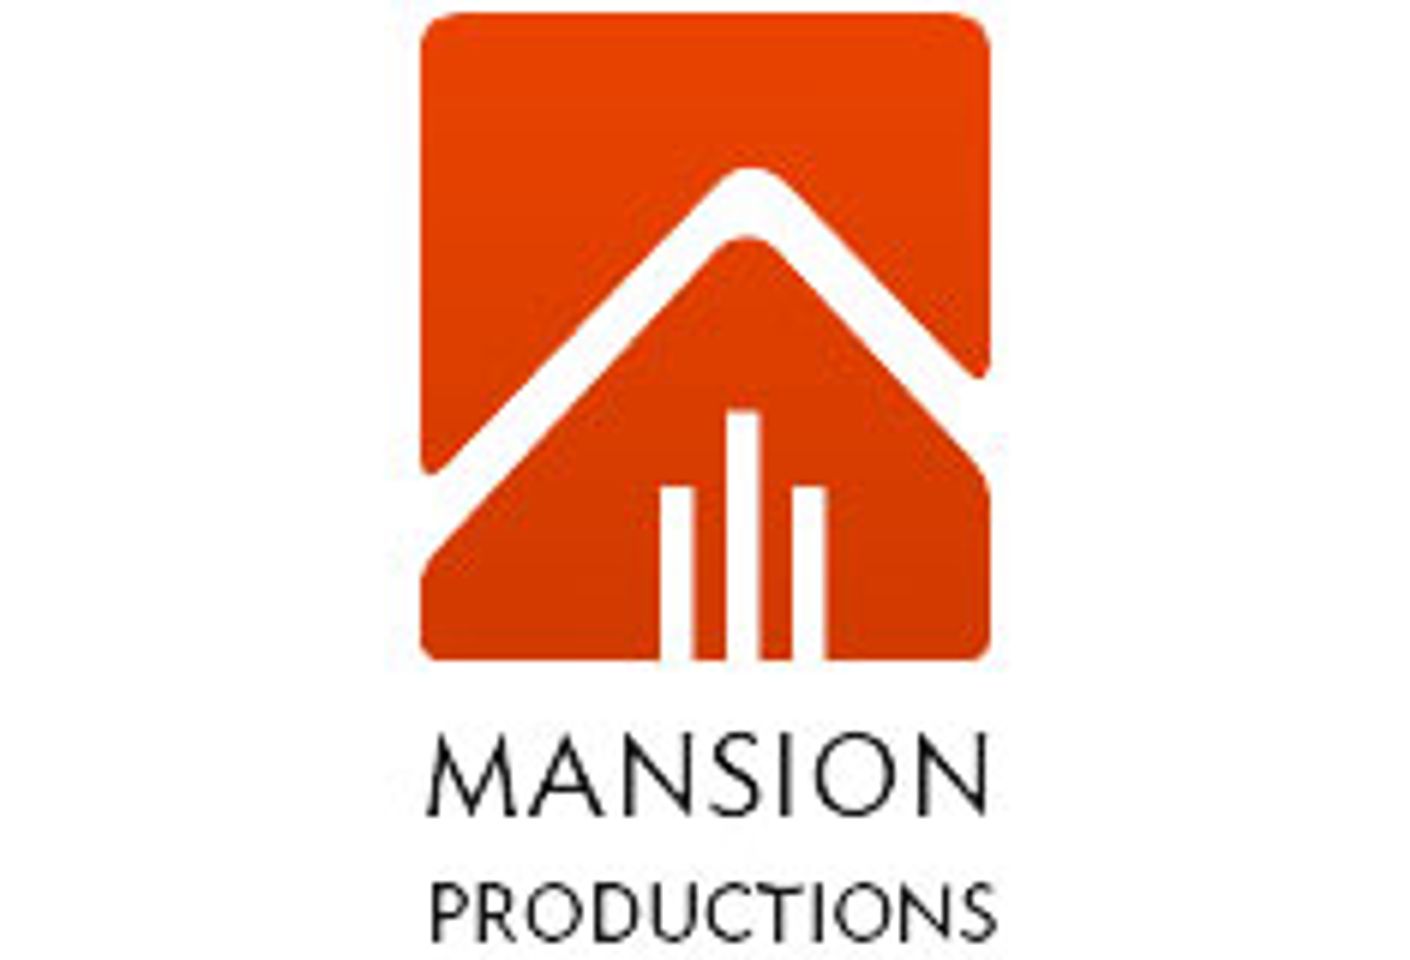 Mansion Productions Addresses Concerns of JW Player in MAS CMS